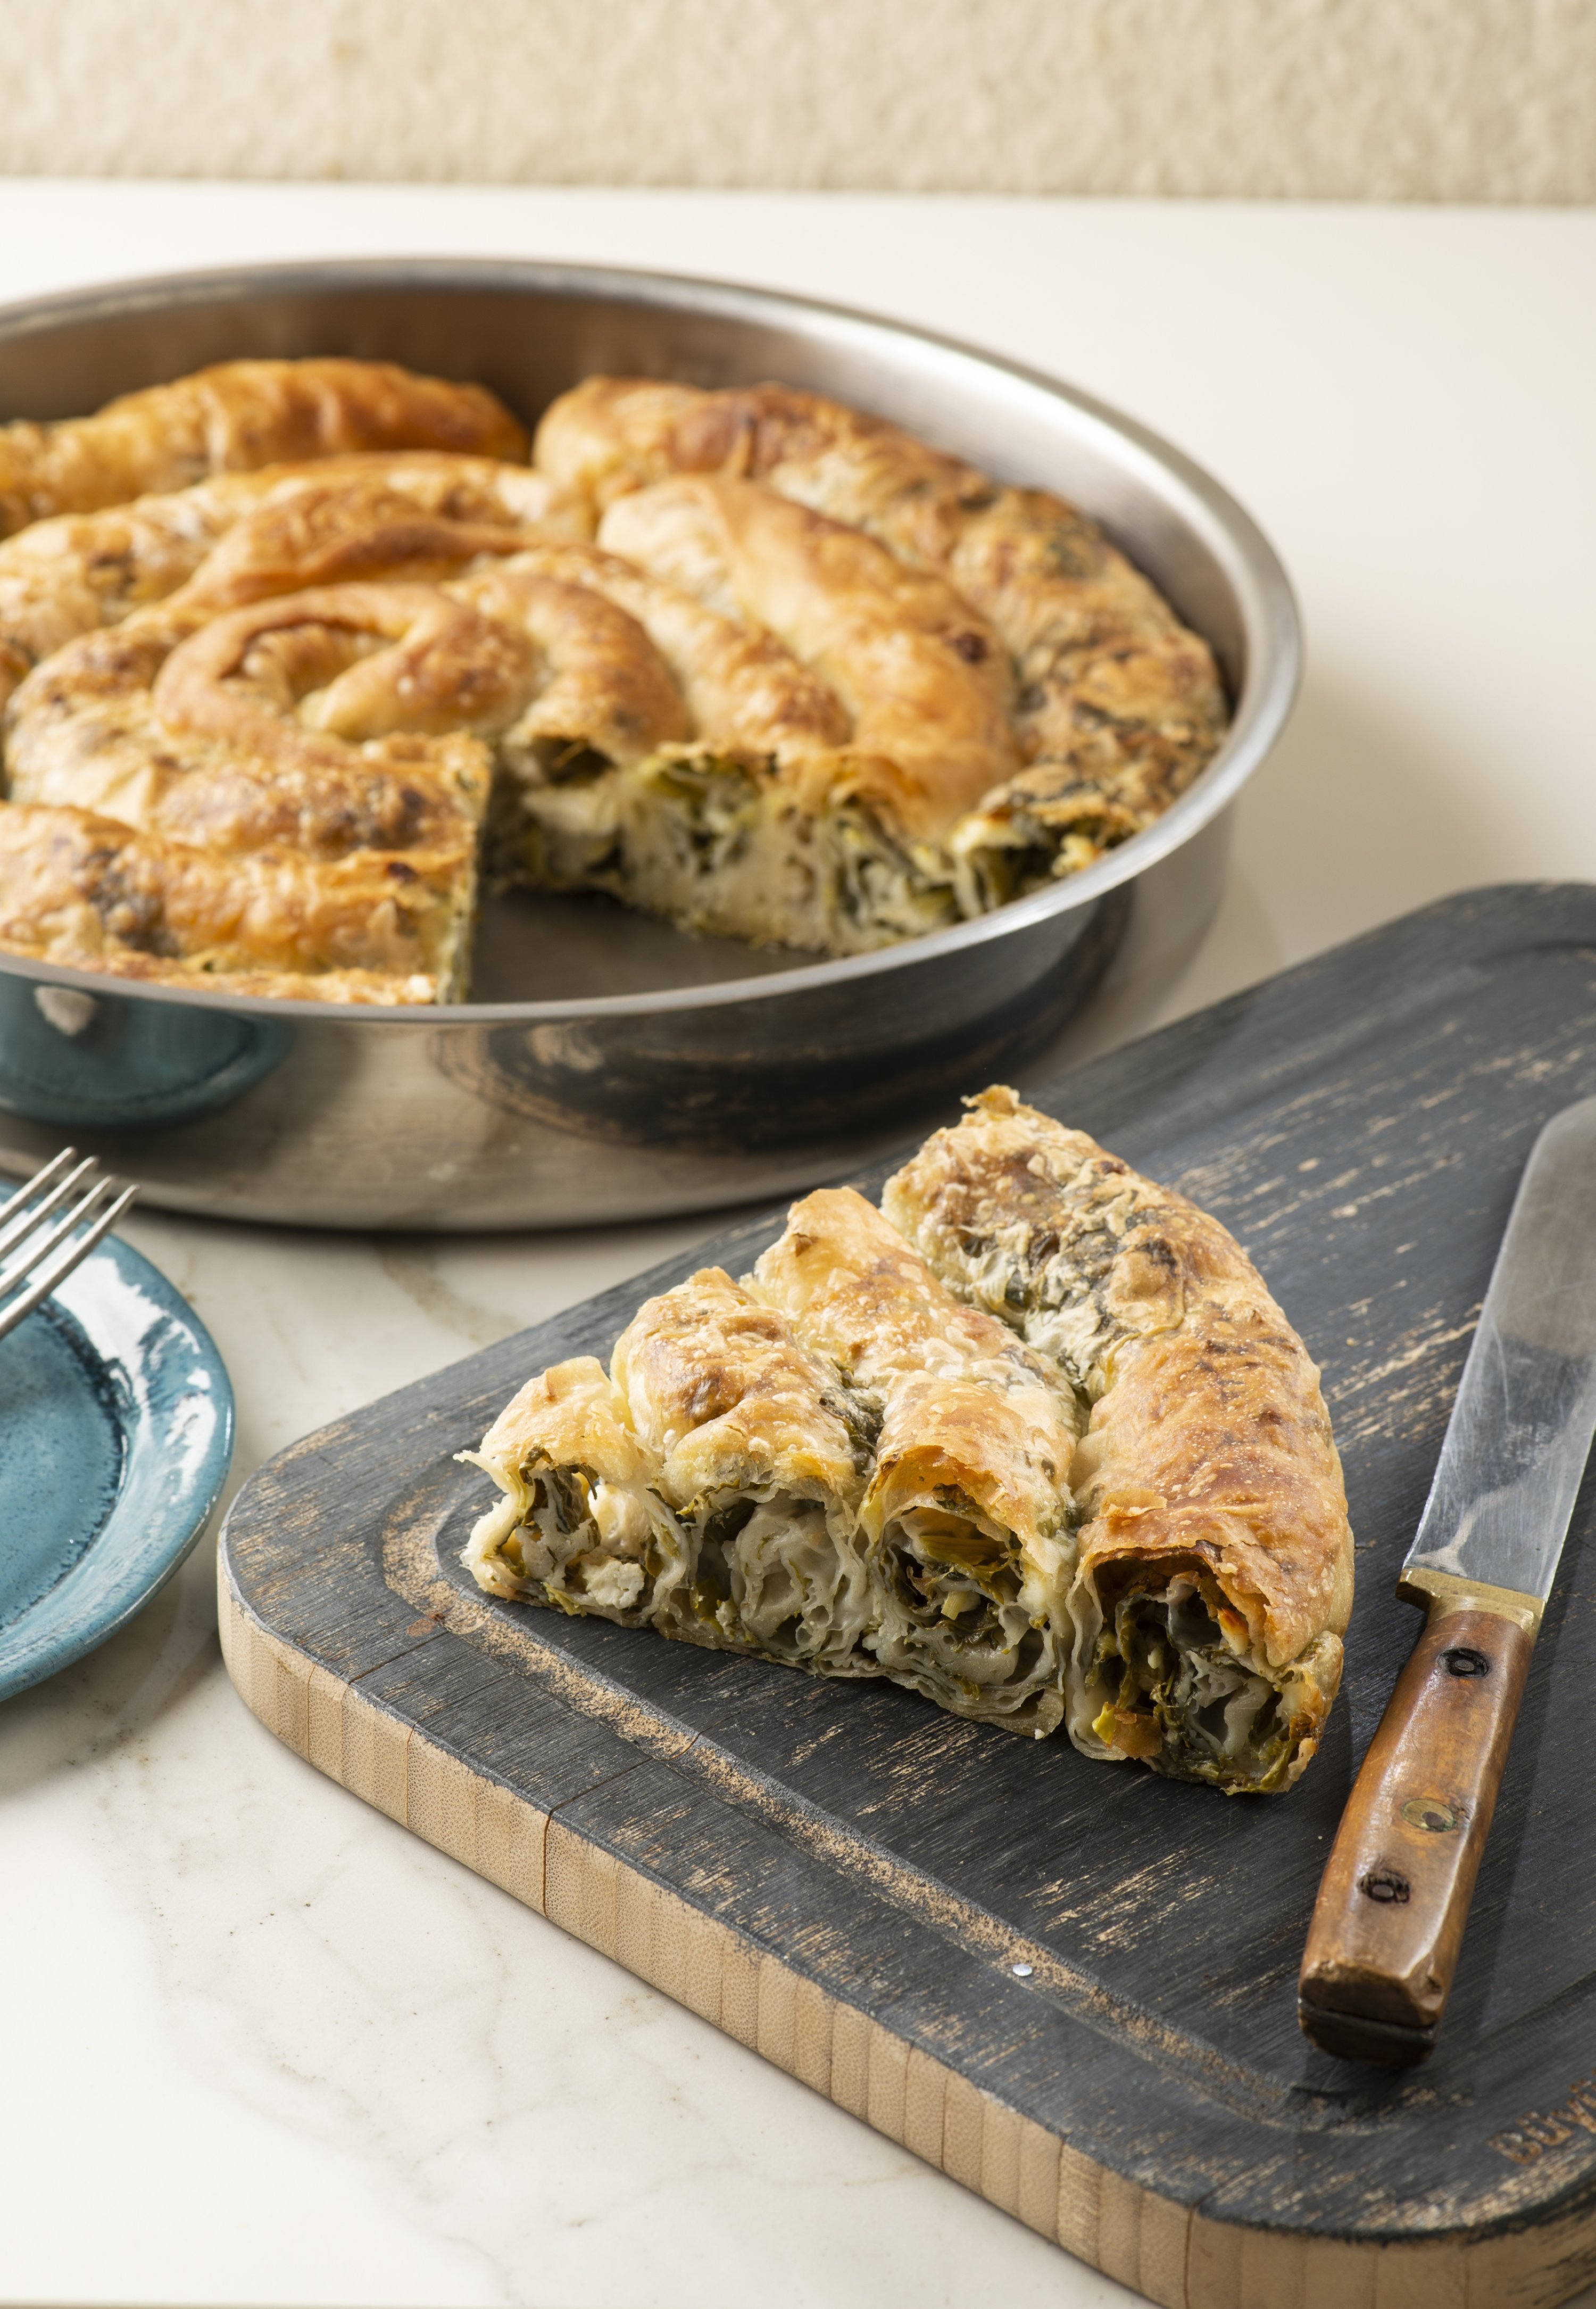 Spinach börek topped with sesame seeds.  (Sabah file photo)